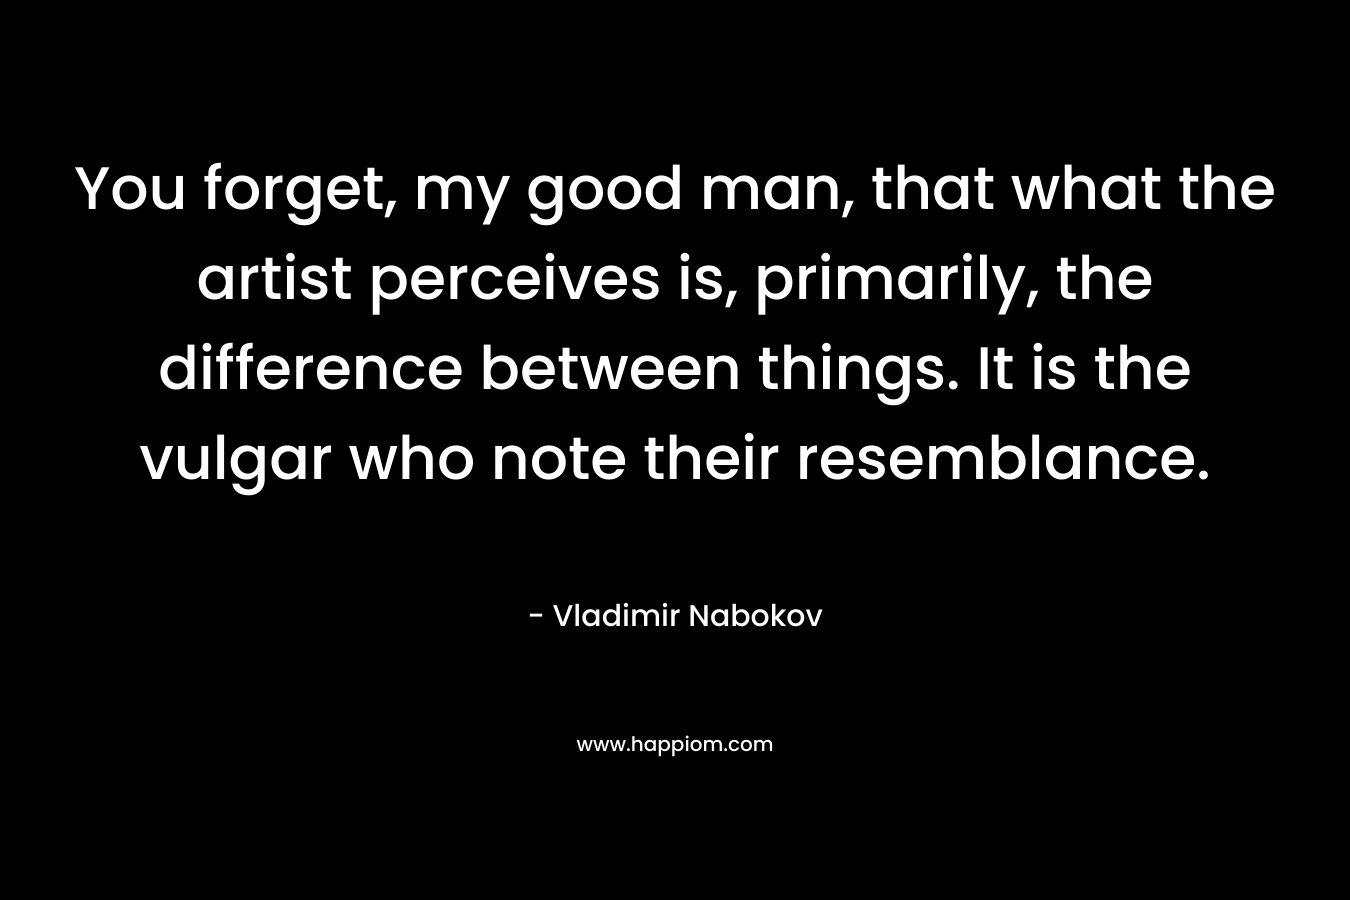 You forget, my good man, that what the artist perceives is, primarily, the difference between things. It is the vulgar who note their resemblance. – Vladimir Nabokov